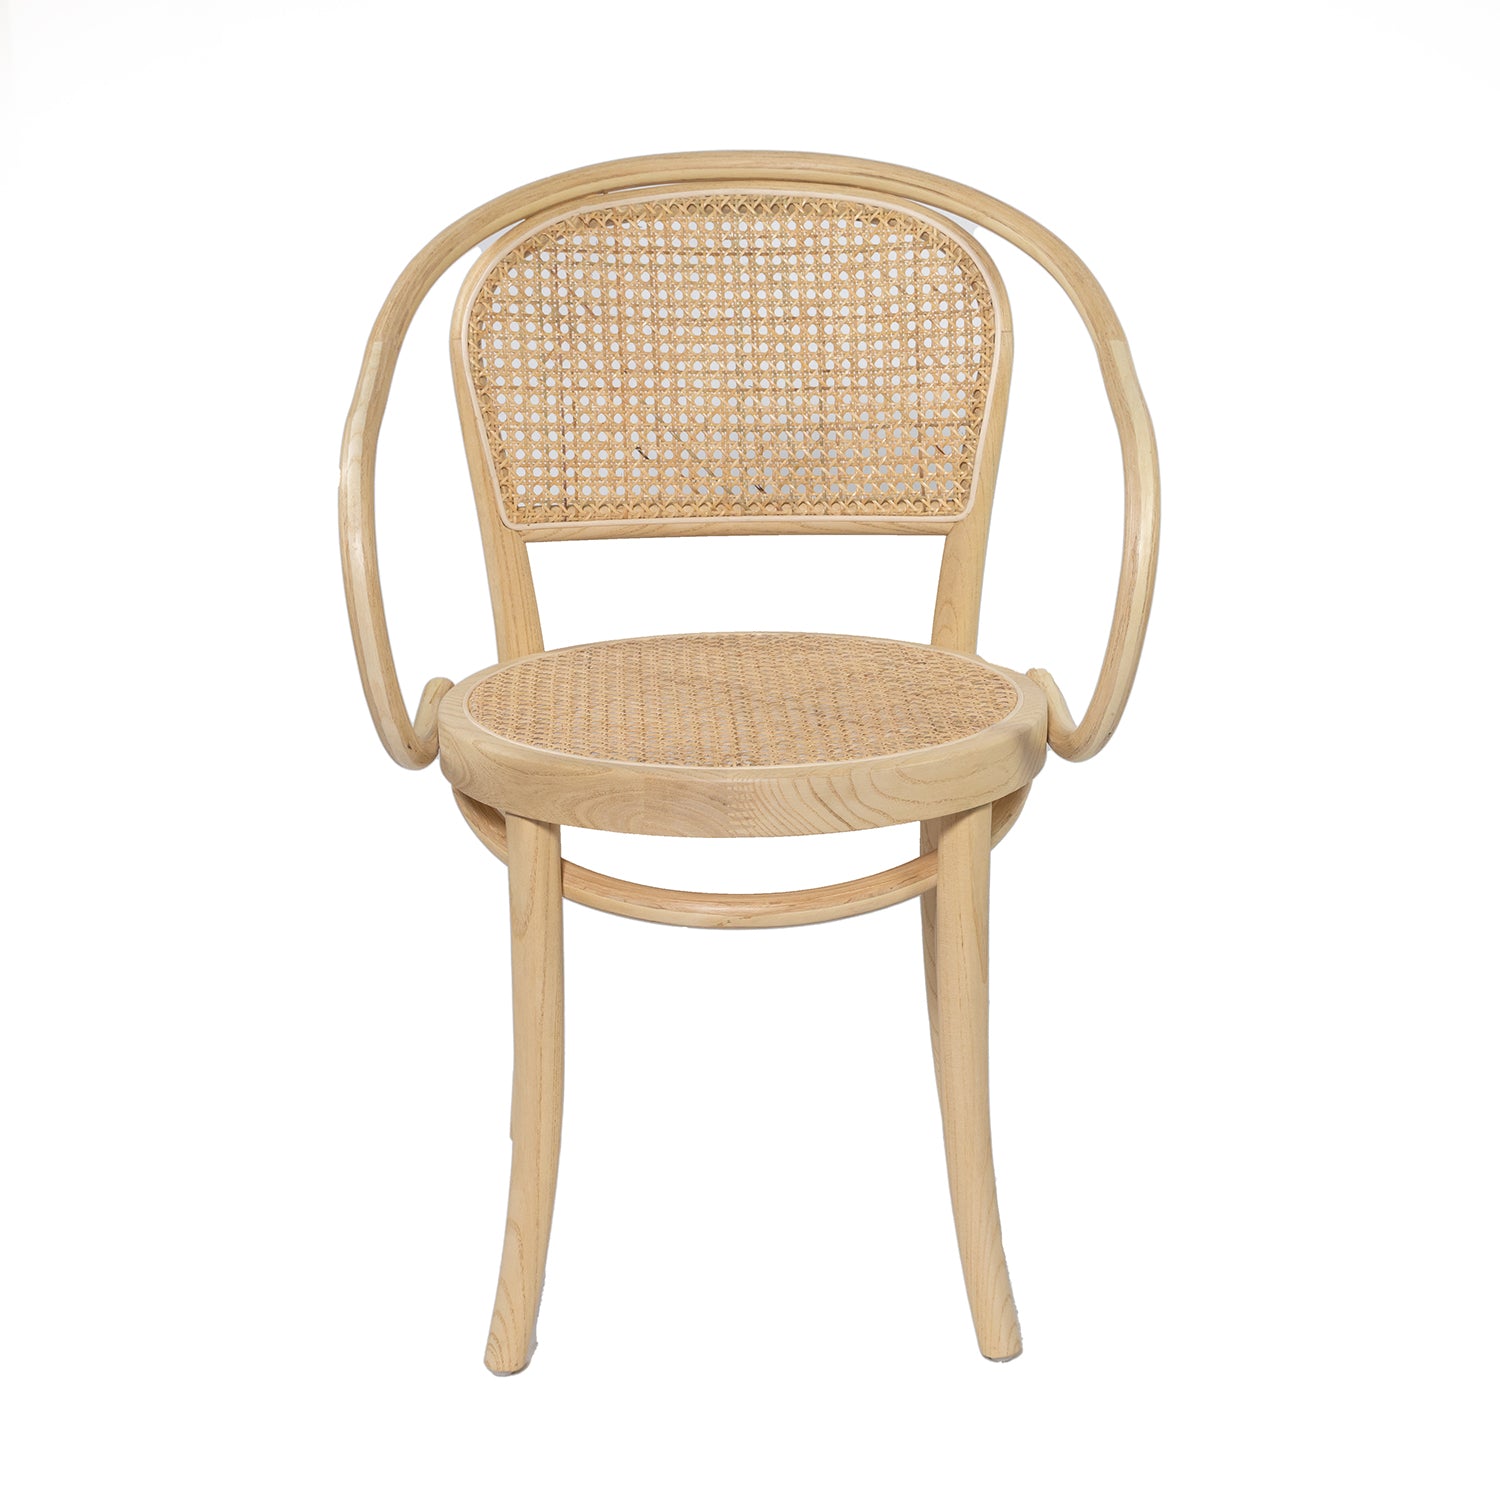 Wooden Round Bentwood Armchair With Rattan Back / Seat